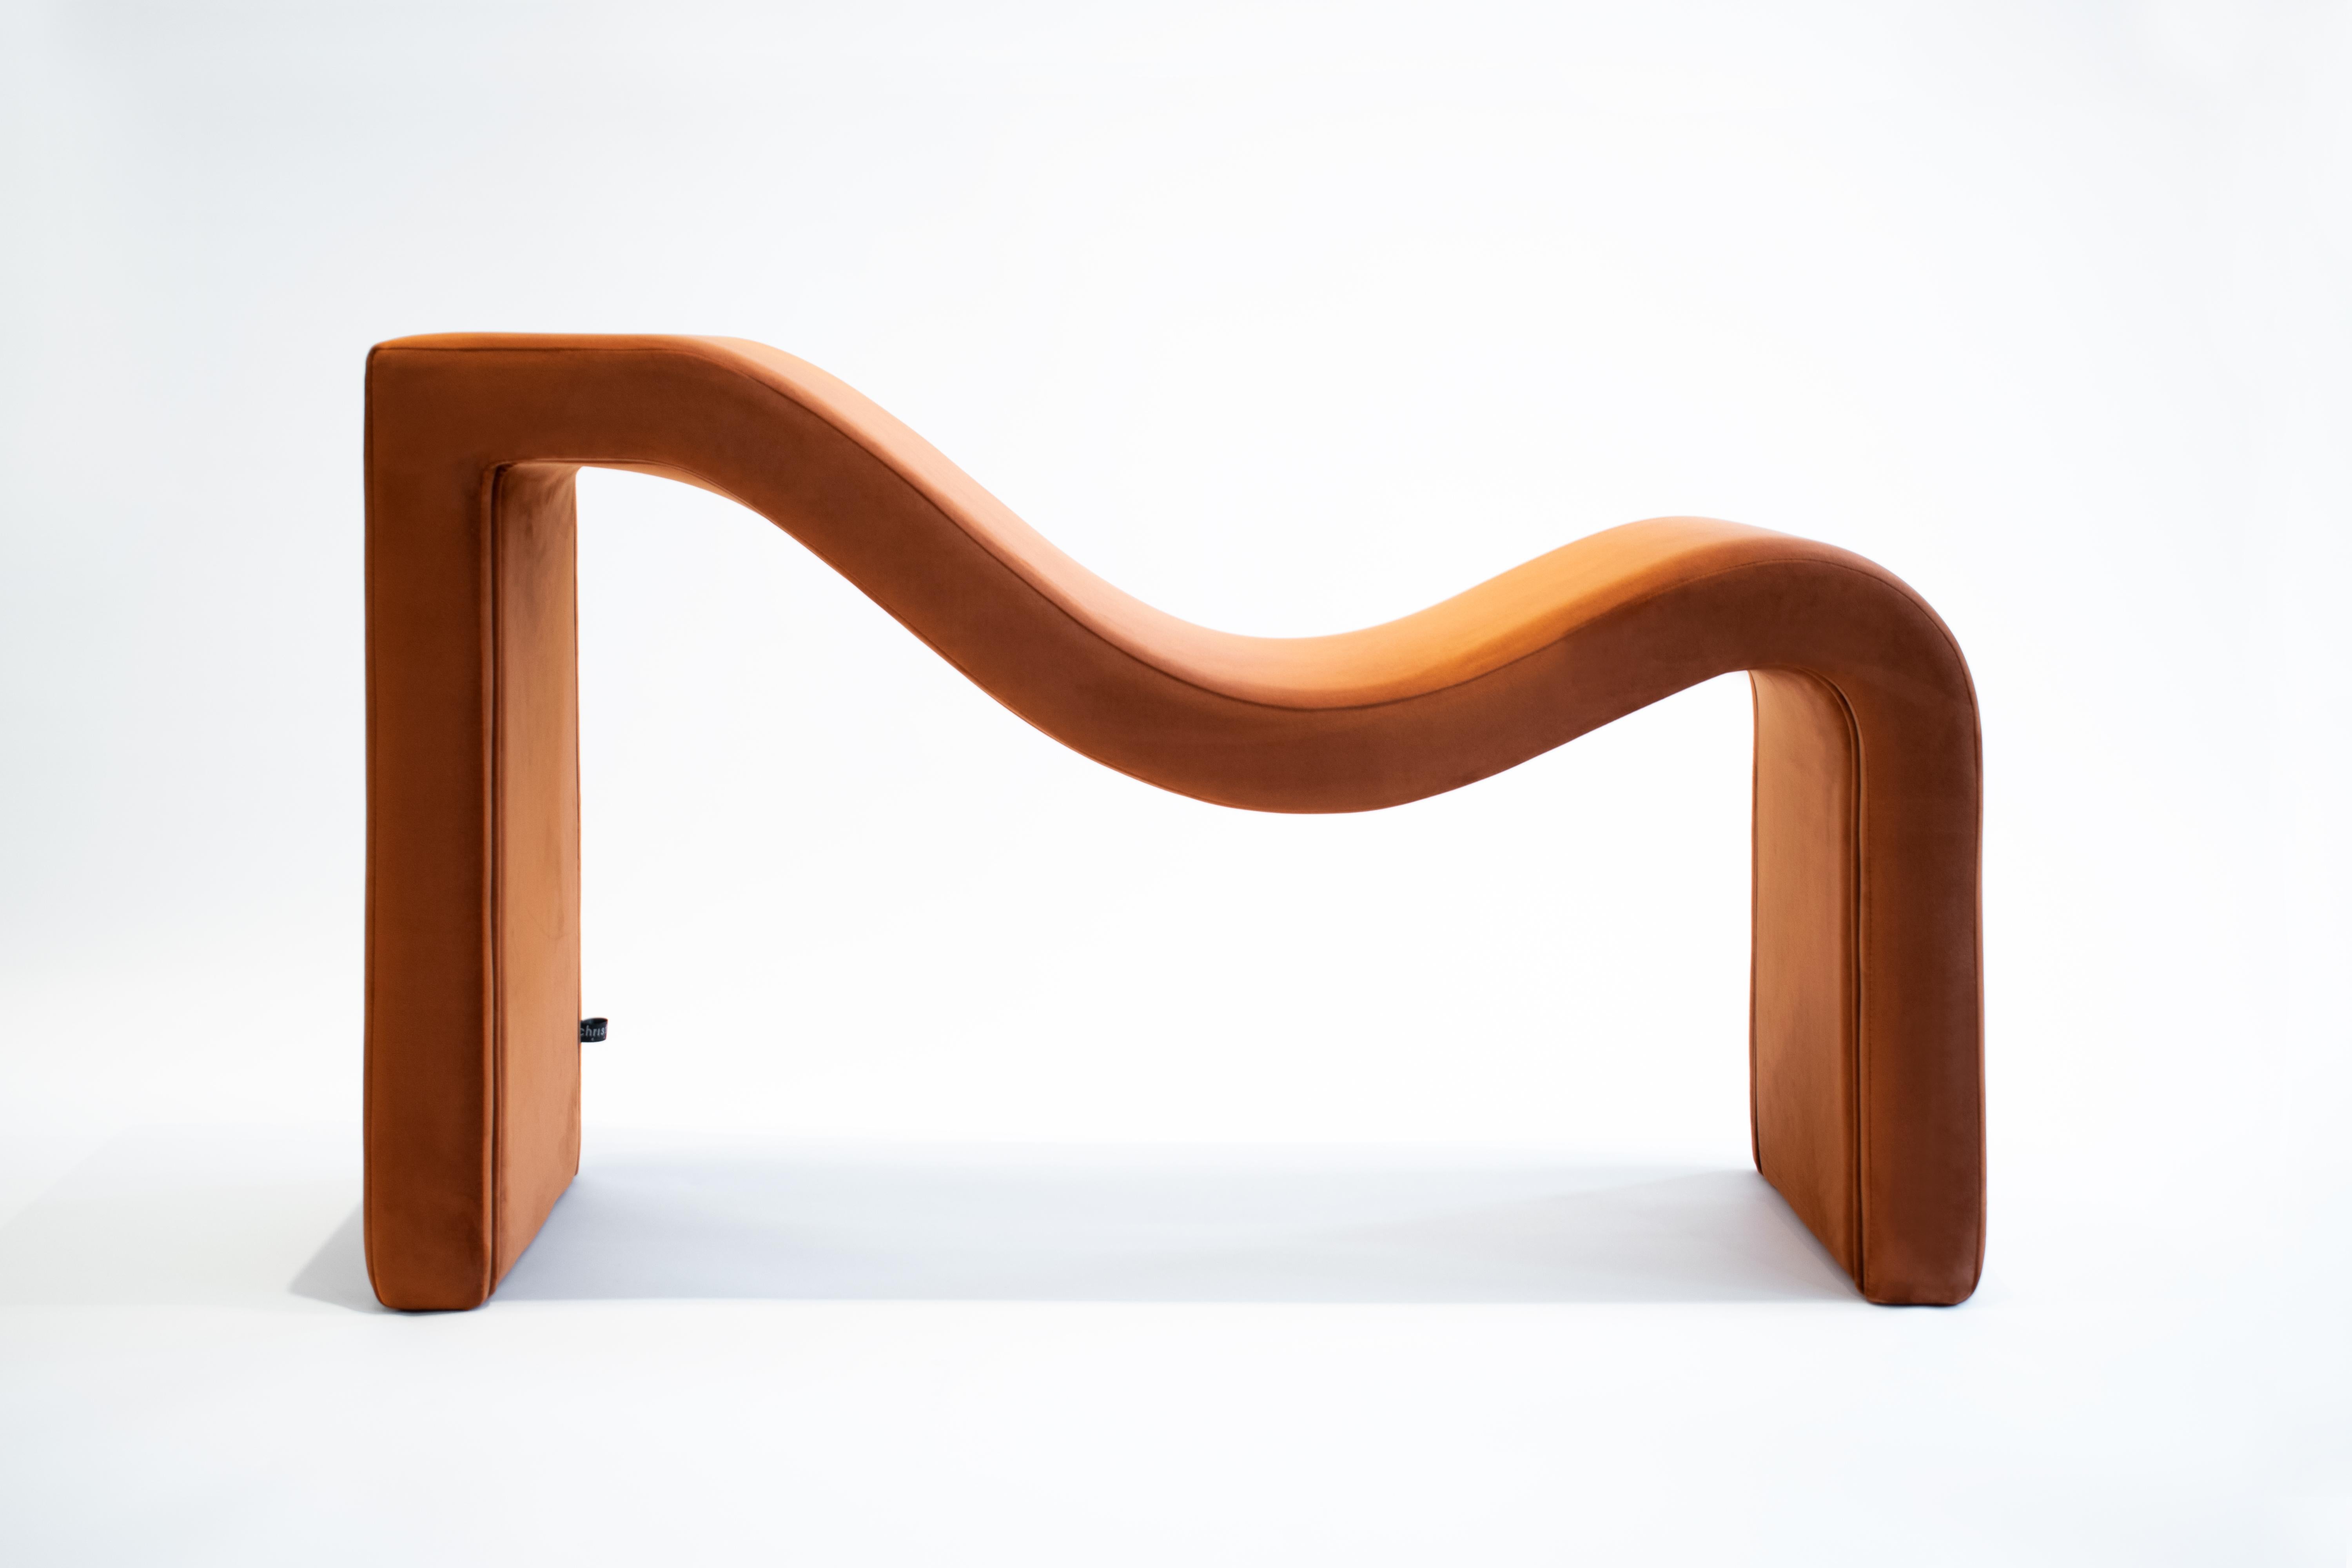 Revisiting the design of its predecessor the design of this single bench is inspired by the summer tides of the mediterranean during the sunset. Covered in macro plush fabric in a sun-kissed terracotta hue, the bench combines sharp and gently curved